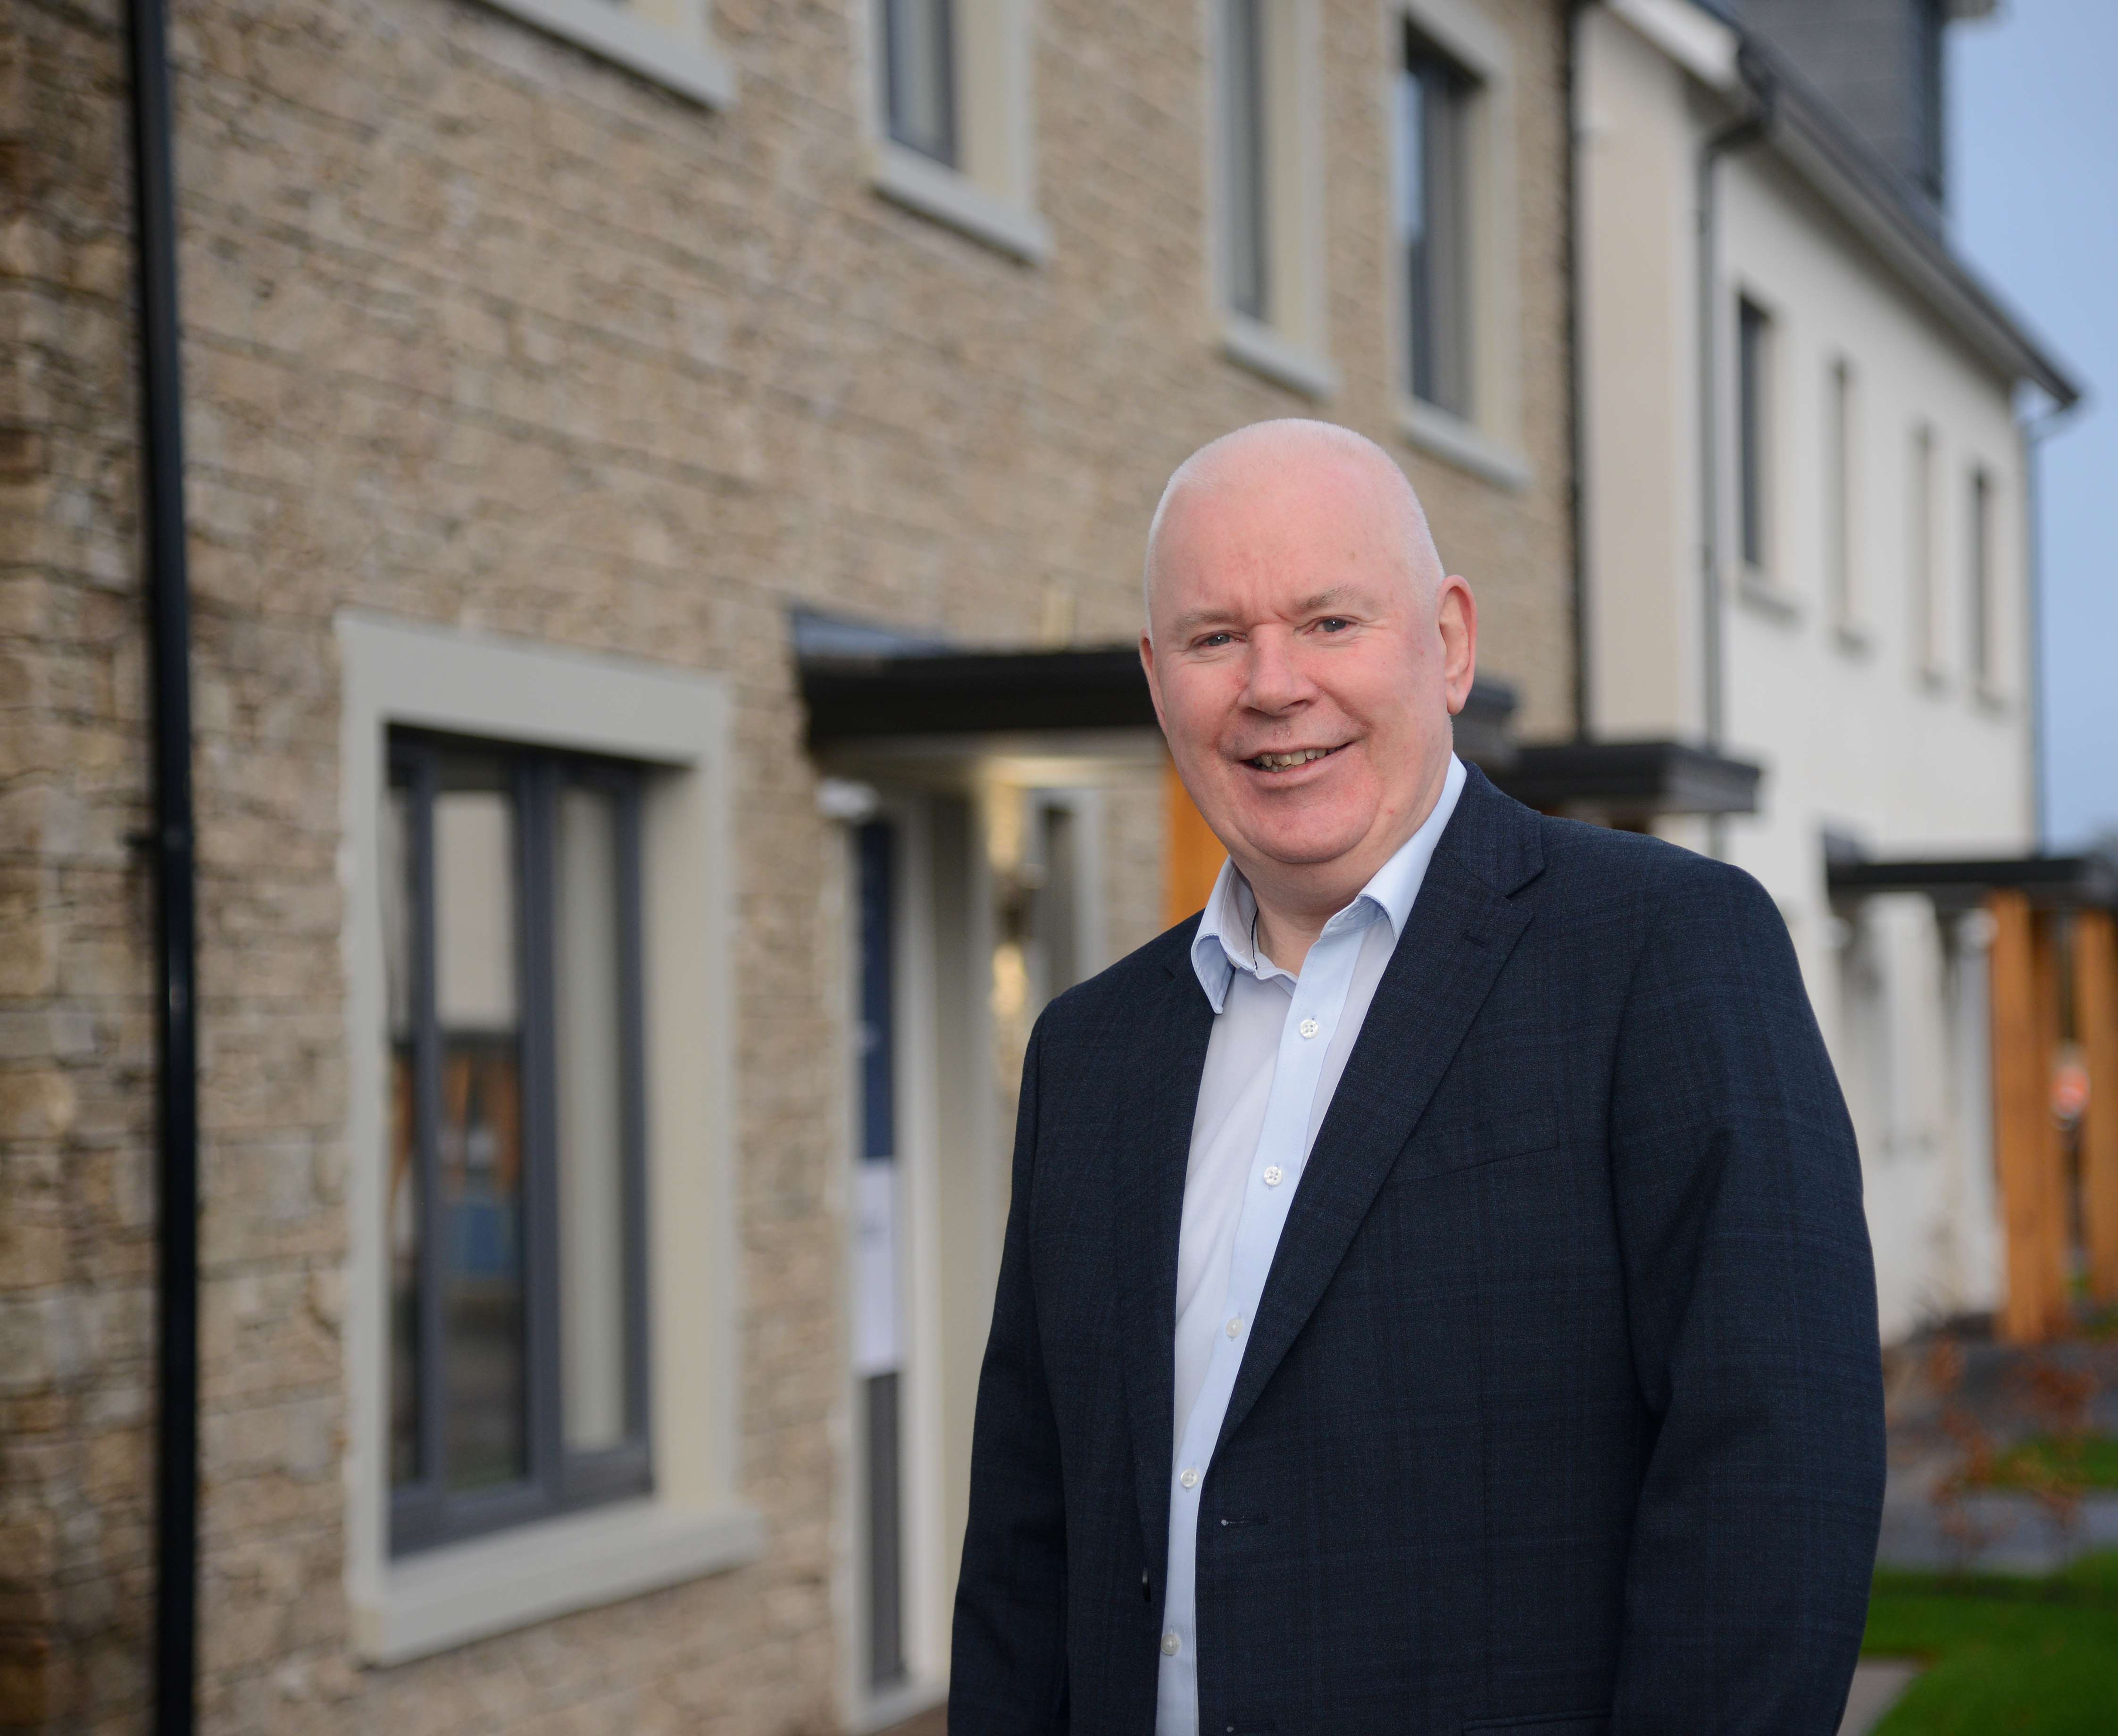 Home builders deliver fourth successive year of improved customer satisfaction